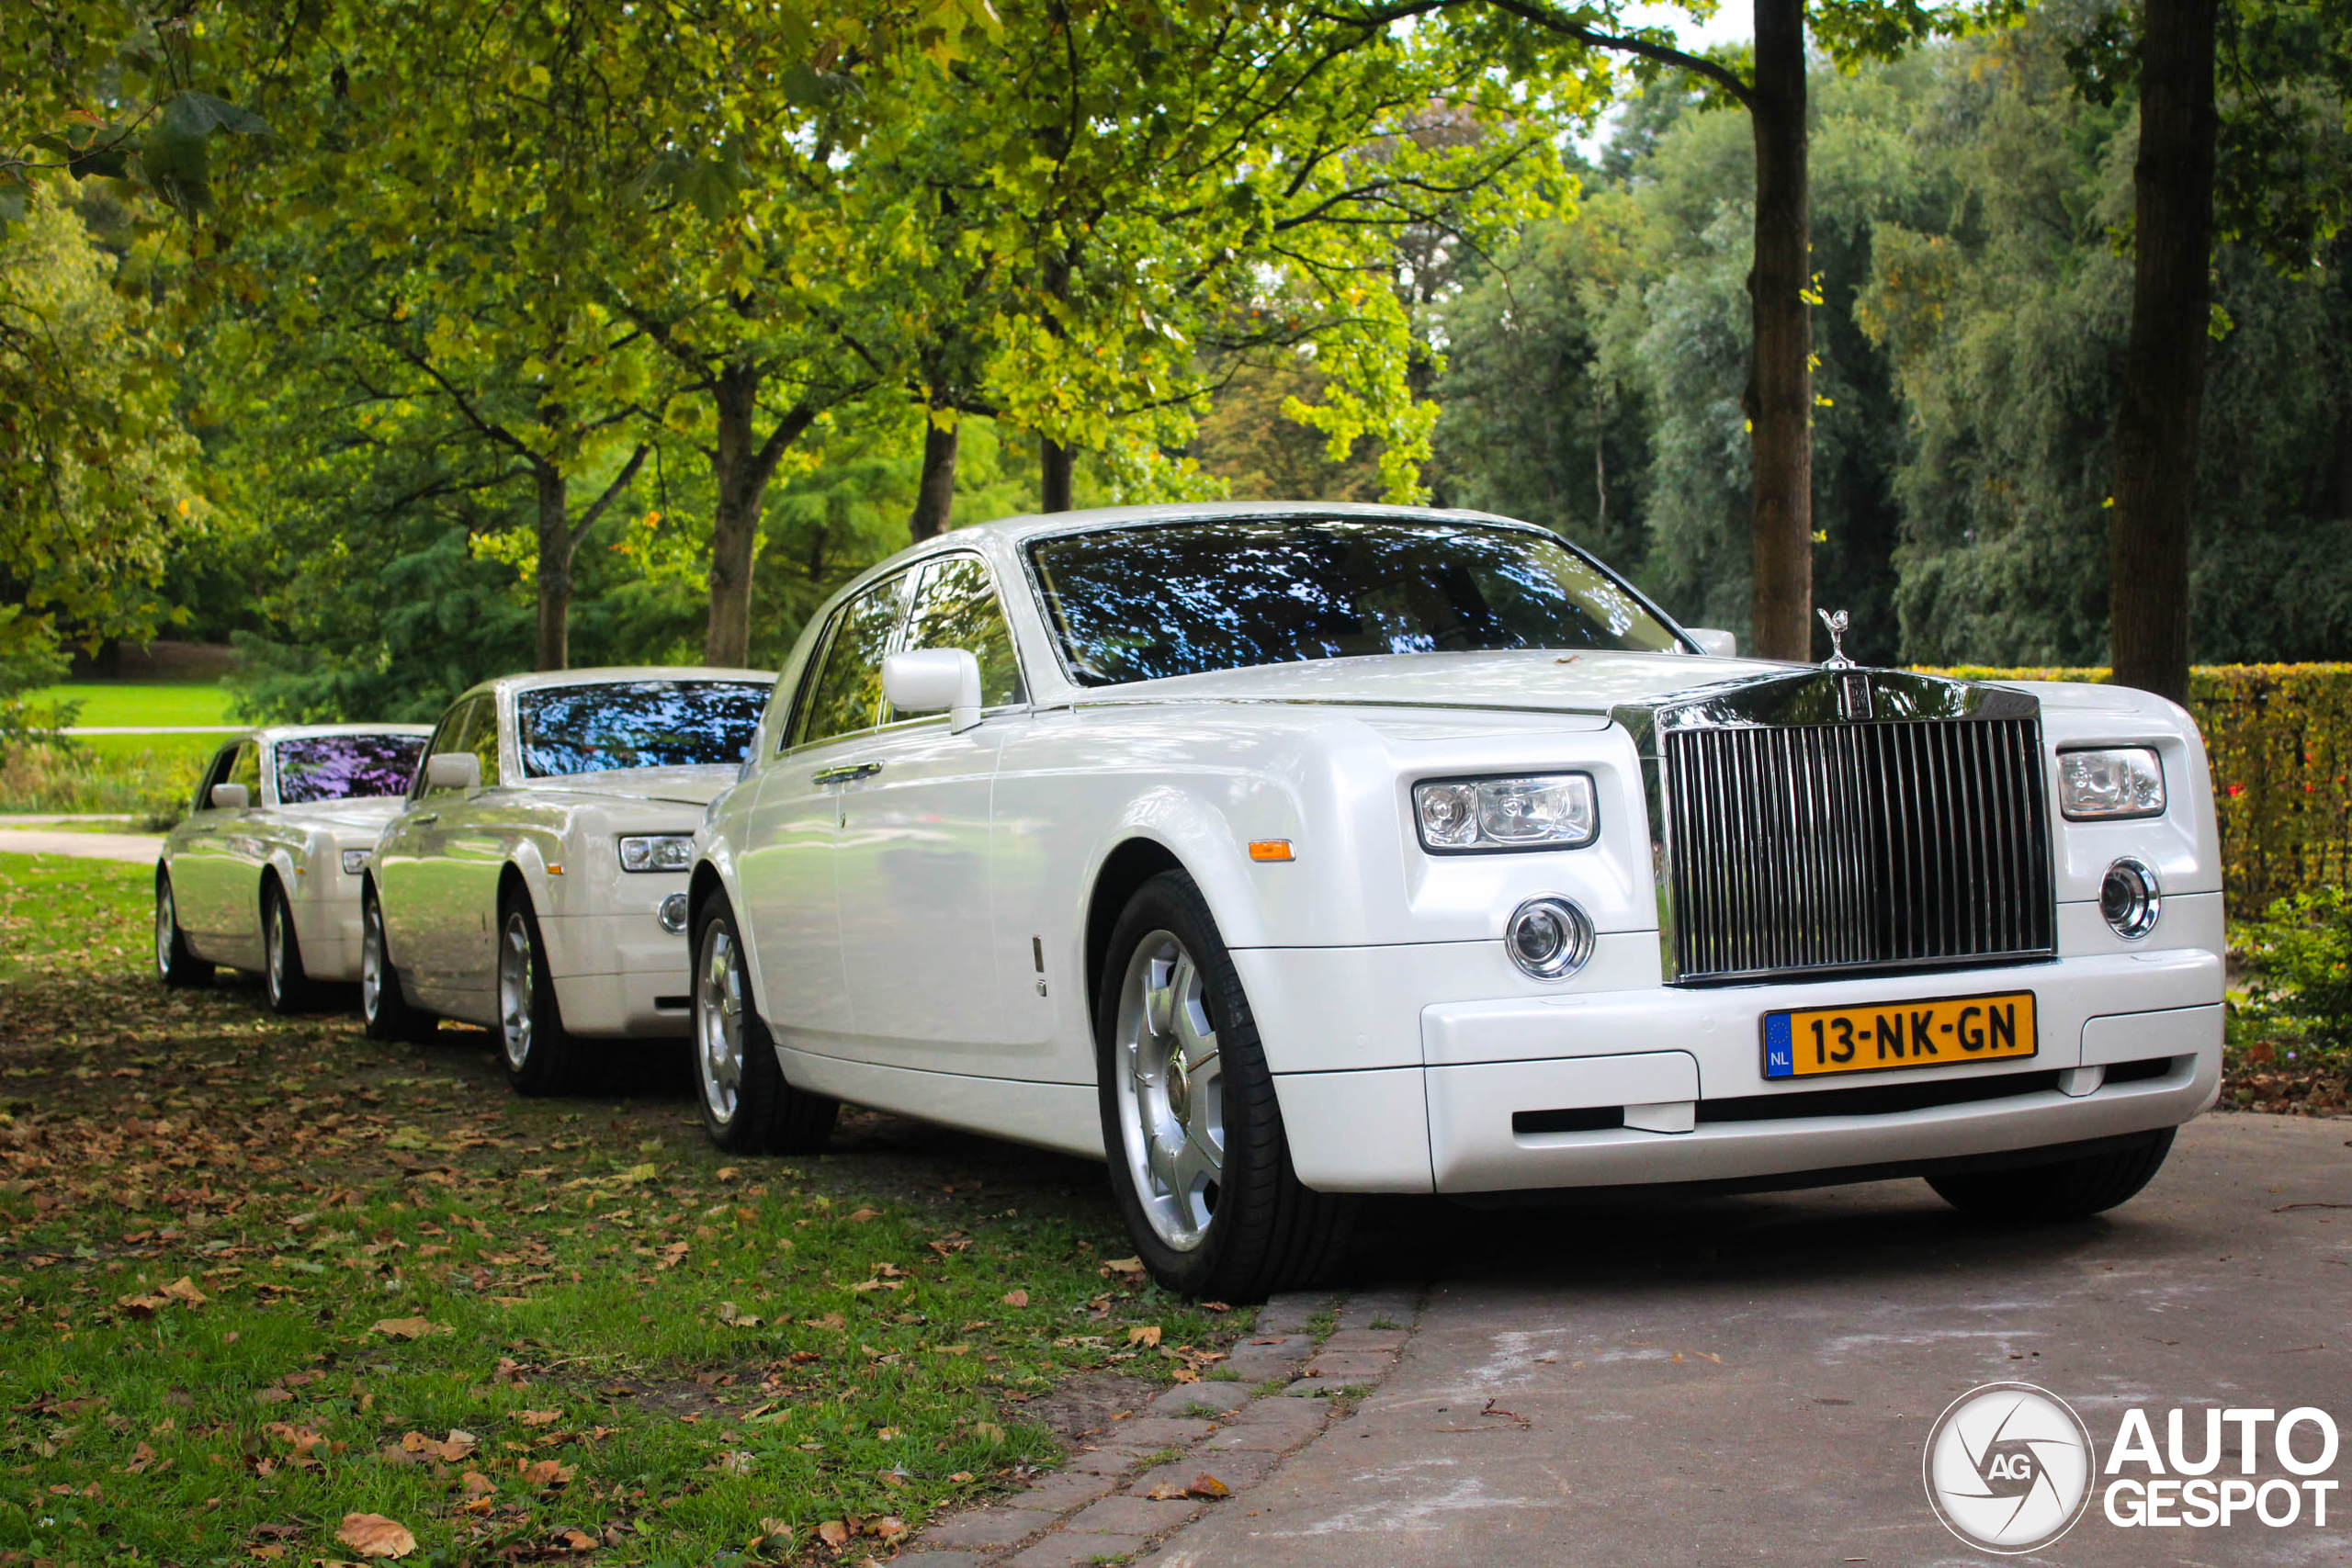 Do you want to arrive like the greatest boss? Then rent these three Phantoms.